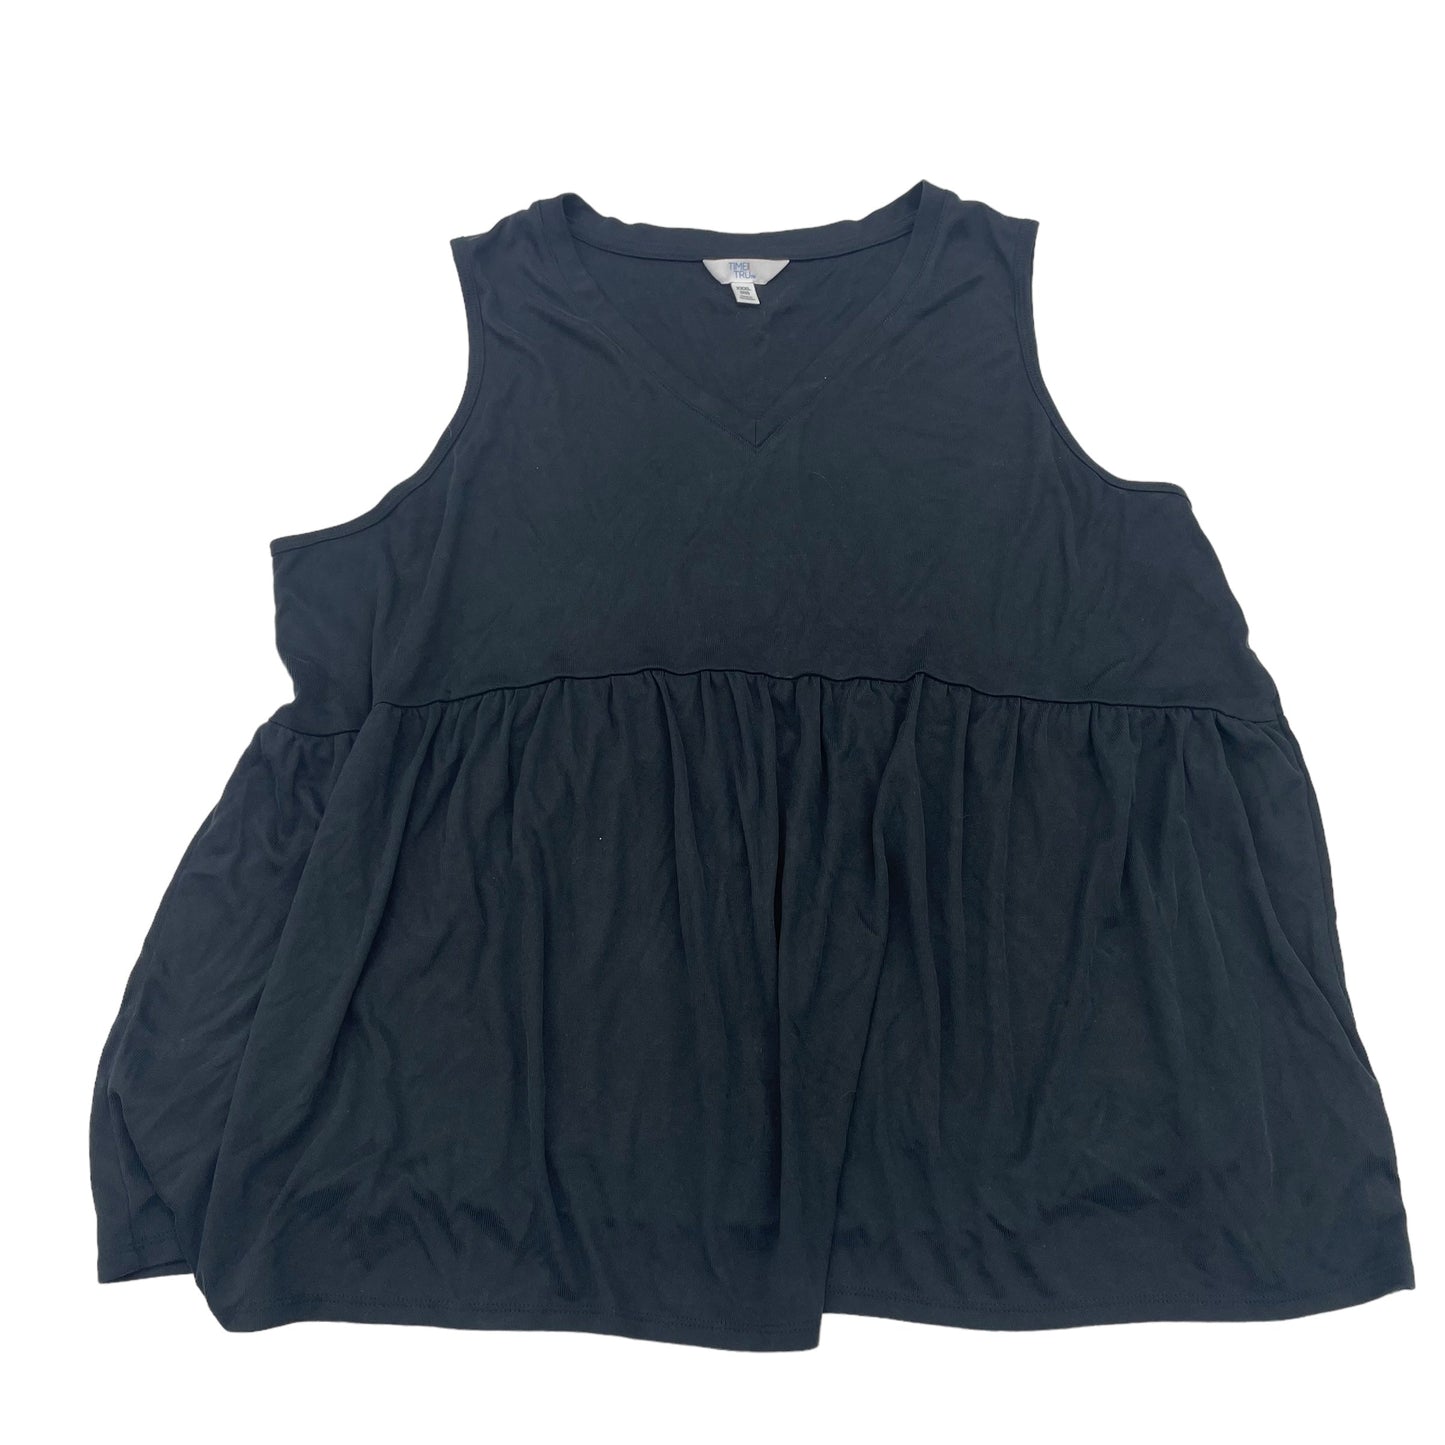 BLACK TIME AND TRU TOP SLEEVELESS, Size 3X